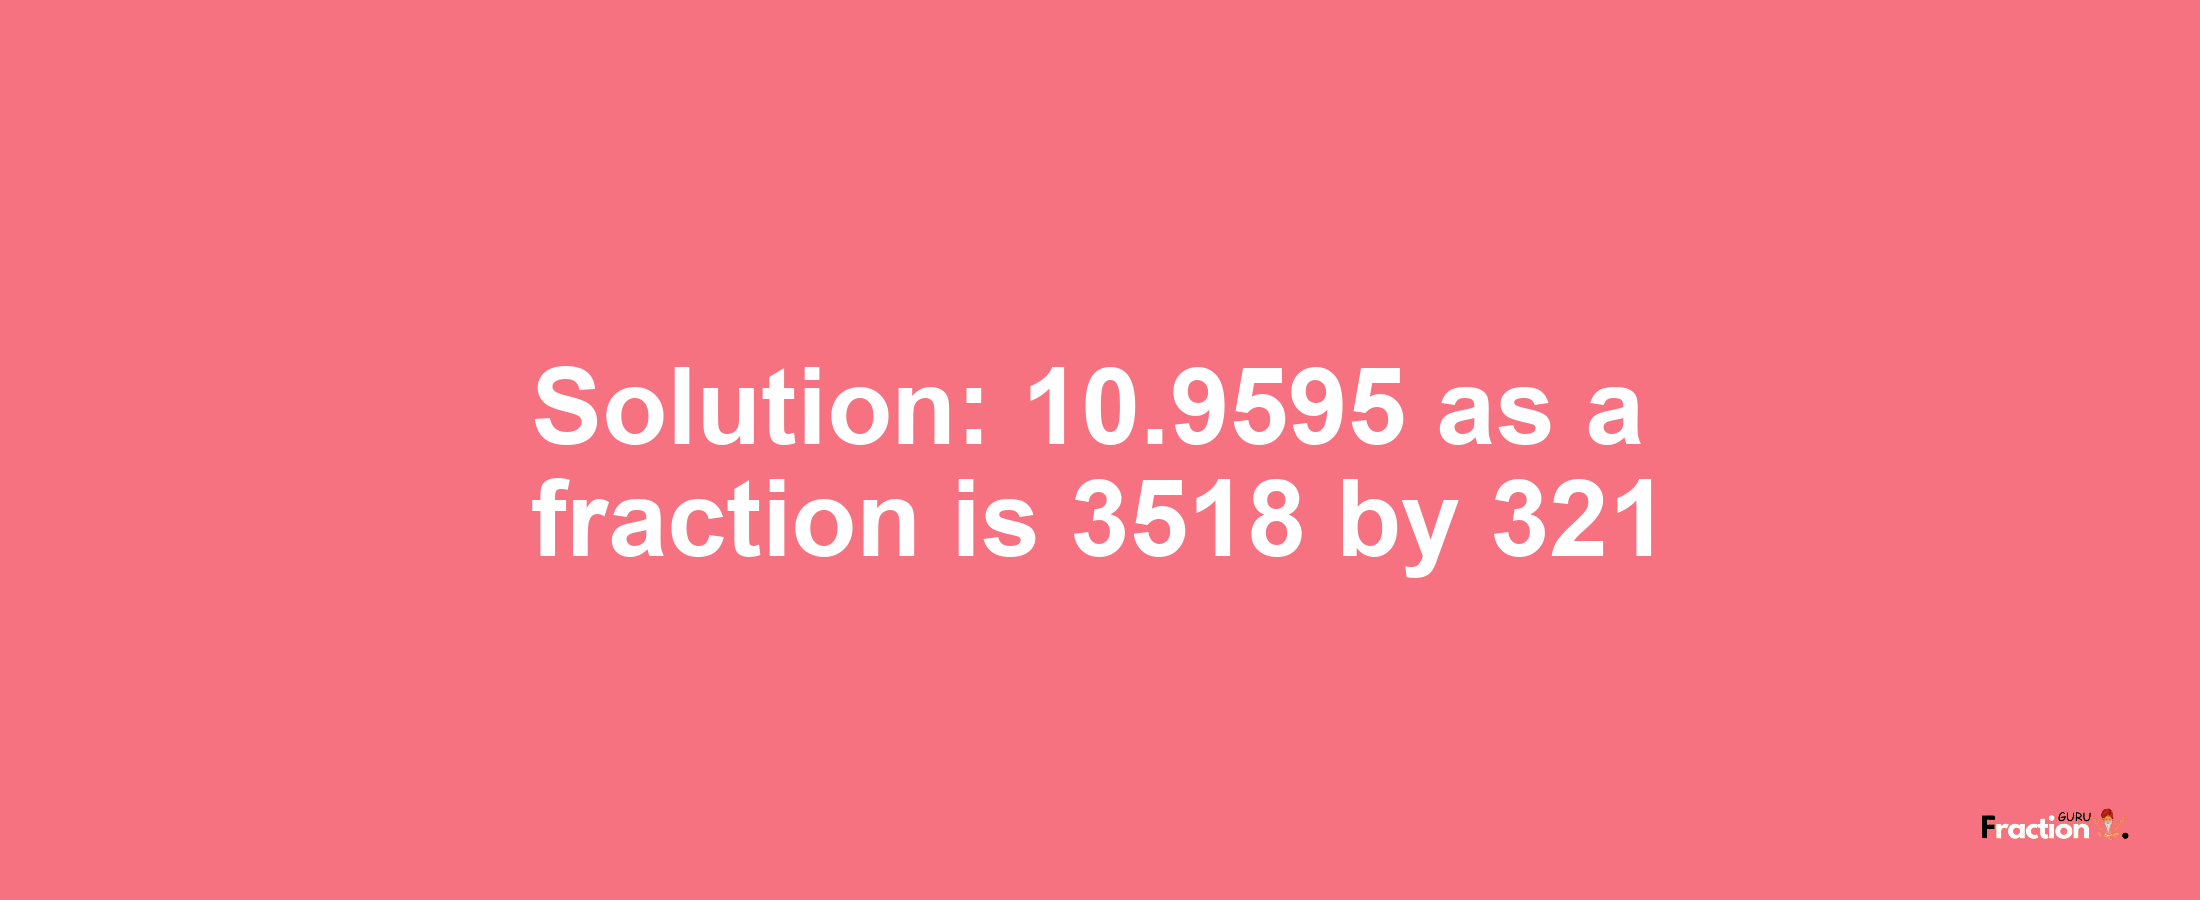 Solution:10.9595 as a fraction is 3518/321